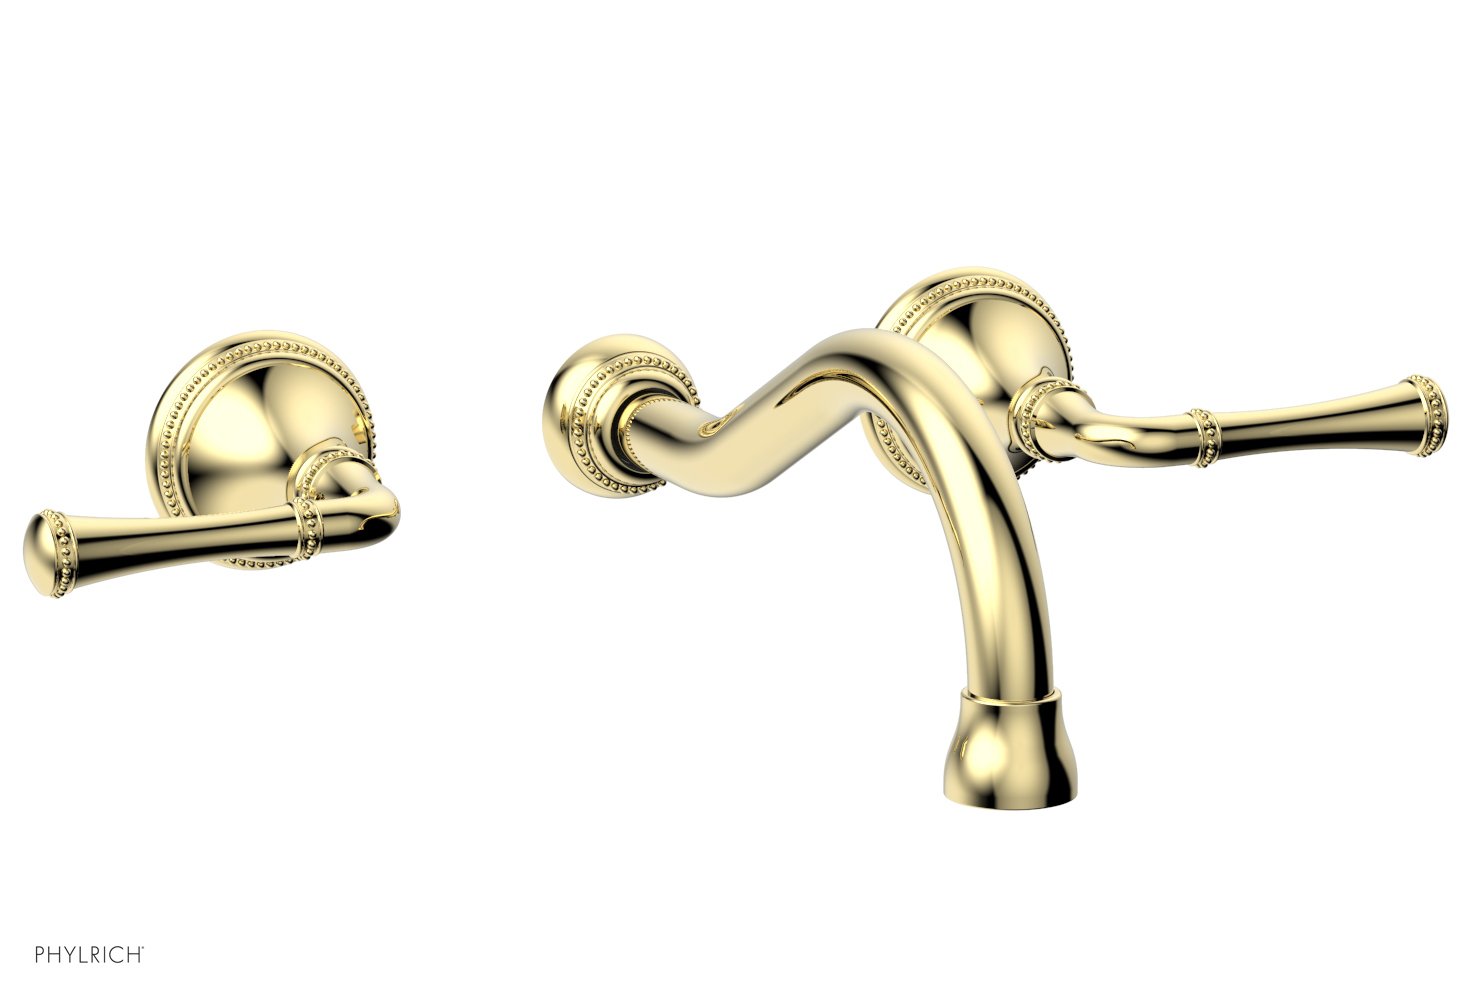 Phylrich BEADED Wall Tub Set - Lever Handles